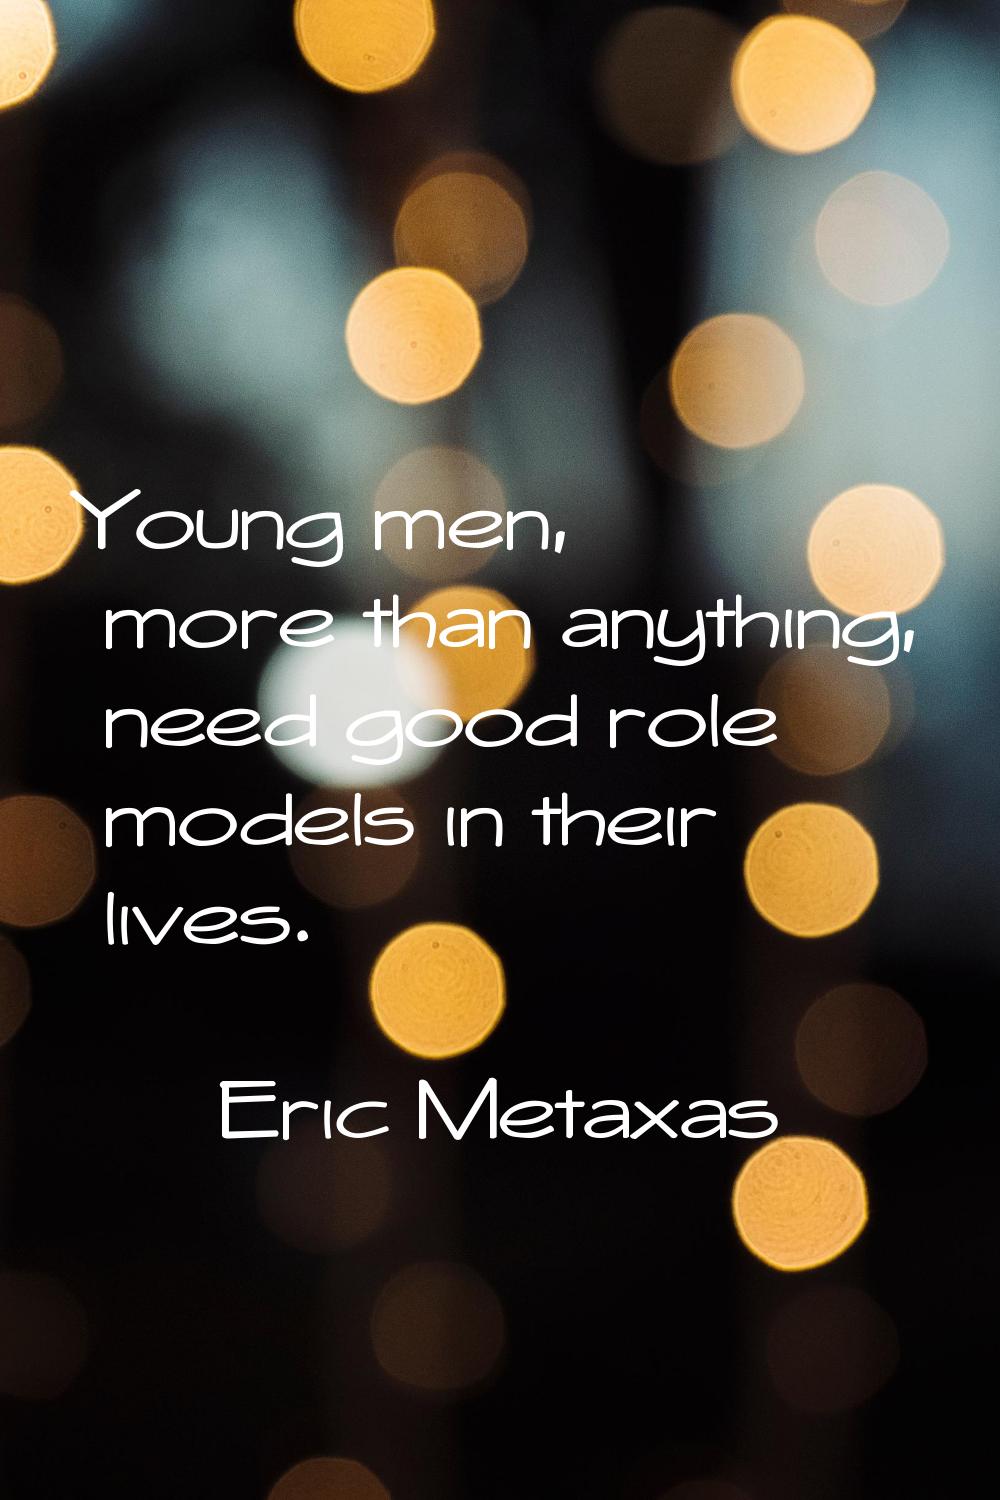 Young men, more than anything, need good role models in their lives.